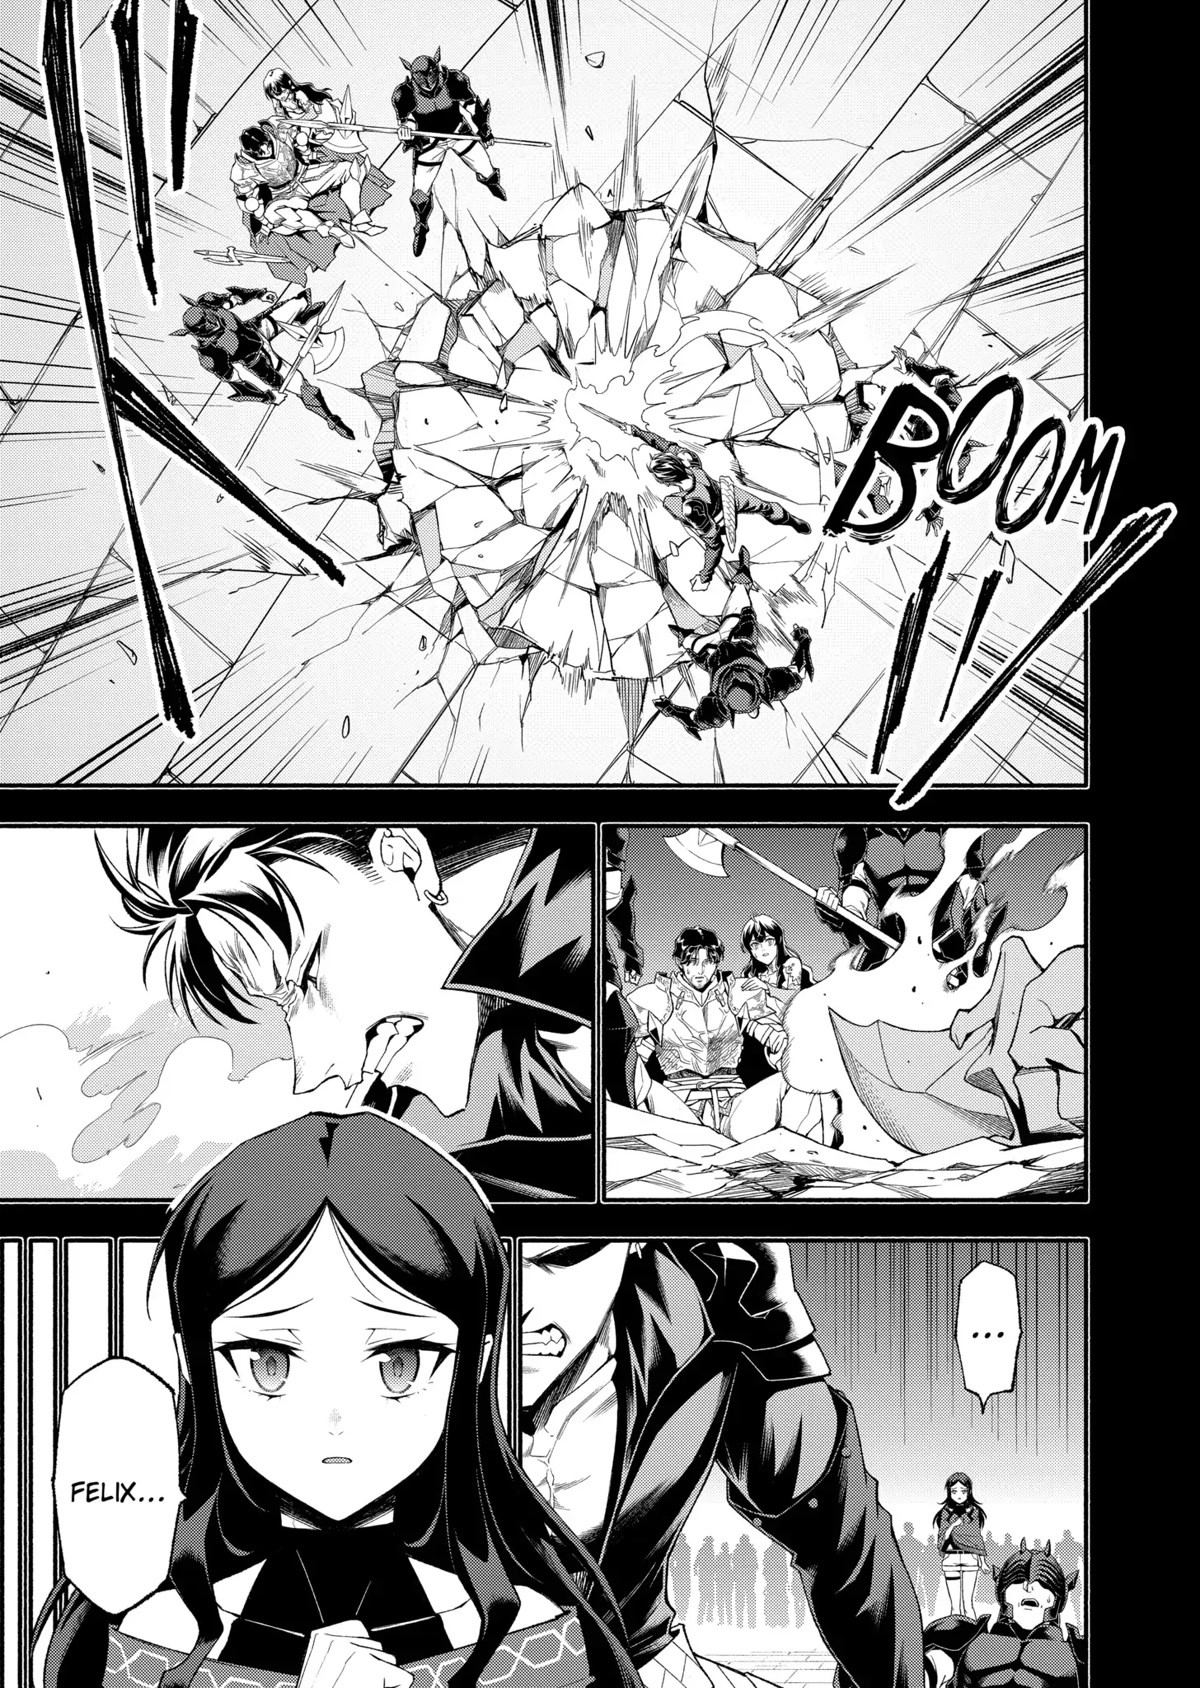 After Being Reborn, I Became The Strongest To Save Everyone - Page 3